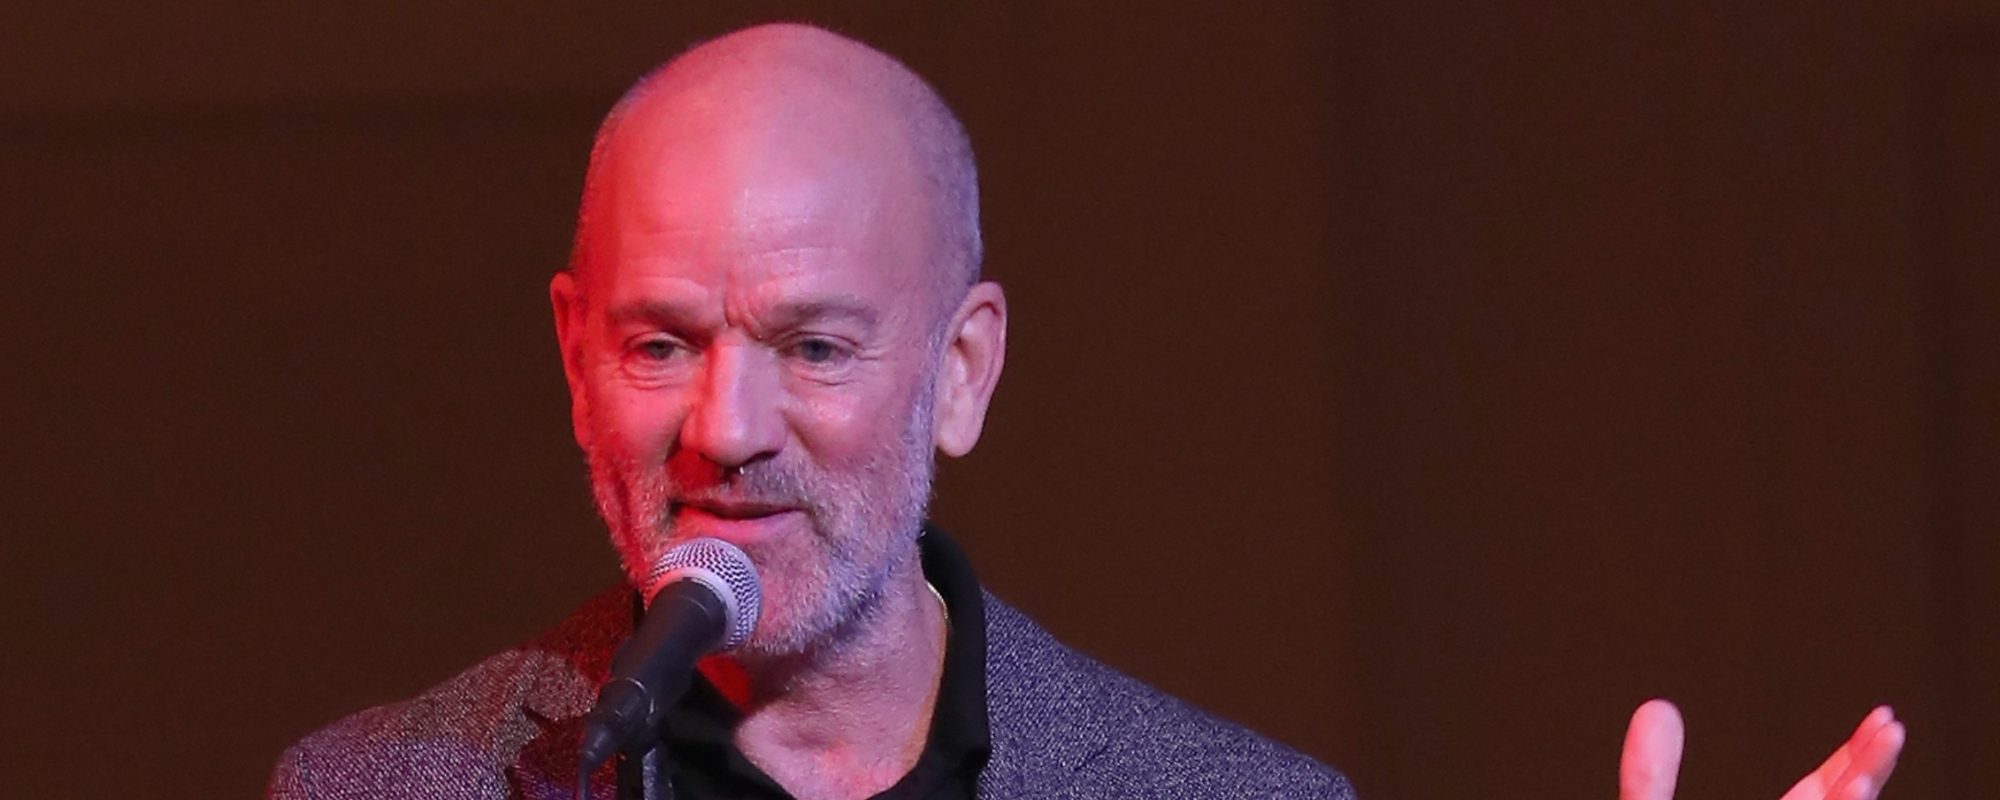 Michael Stipe Talks New Solo Album, Meeting Taylor Swift and More in Year-Long Feature: “I Have to Finish These Songs Already”